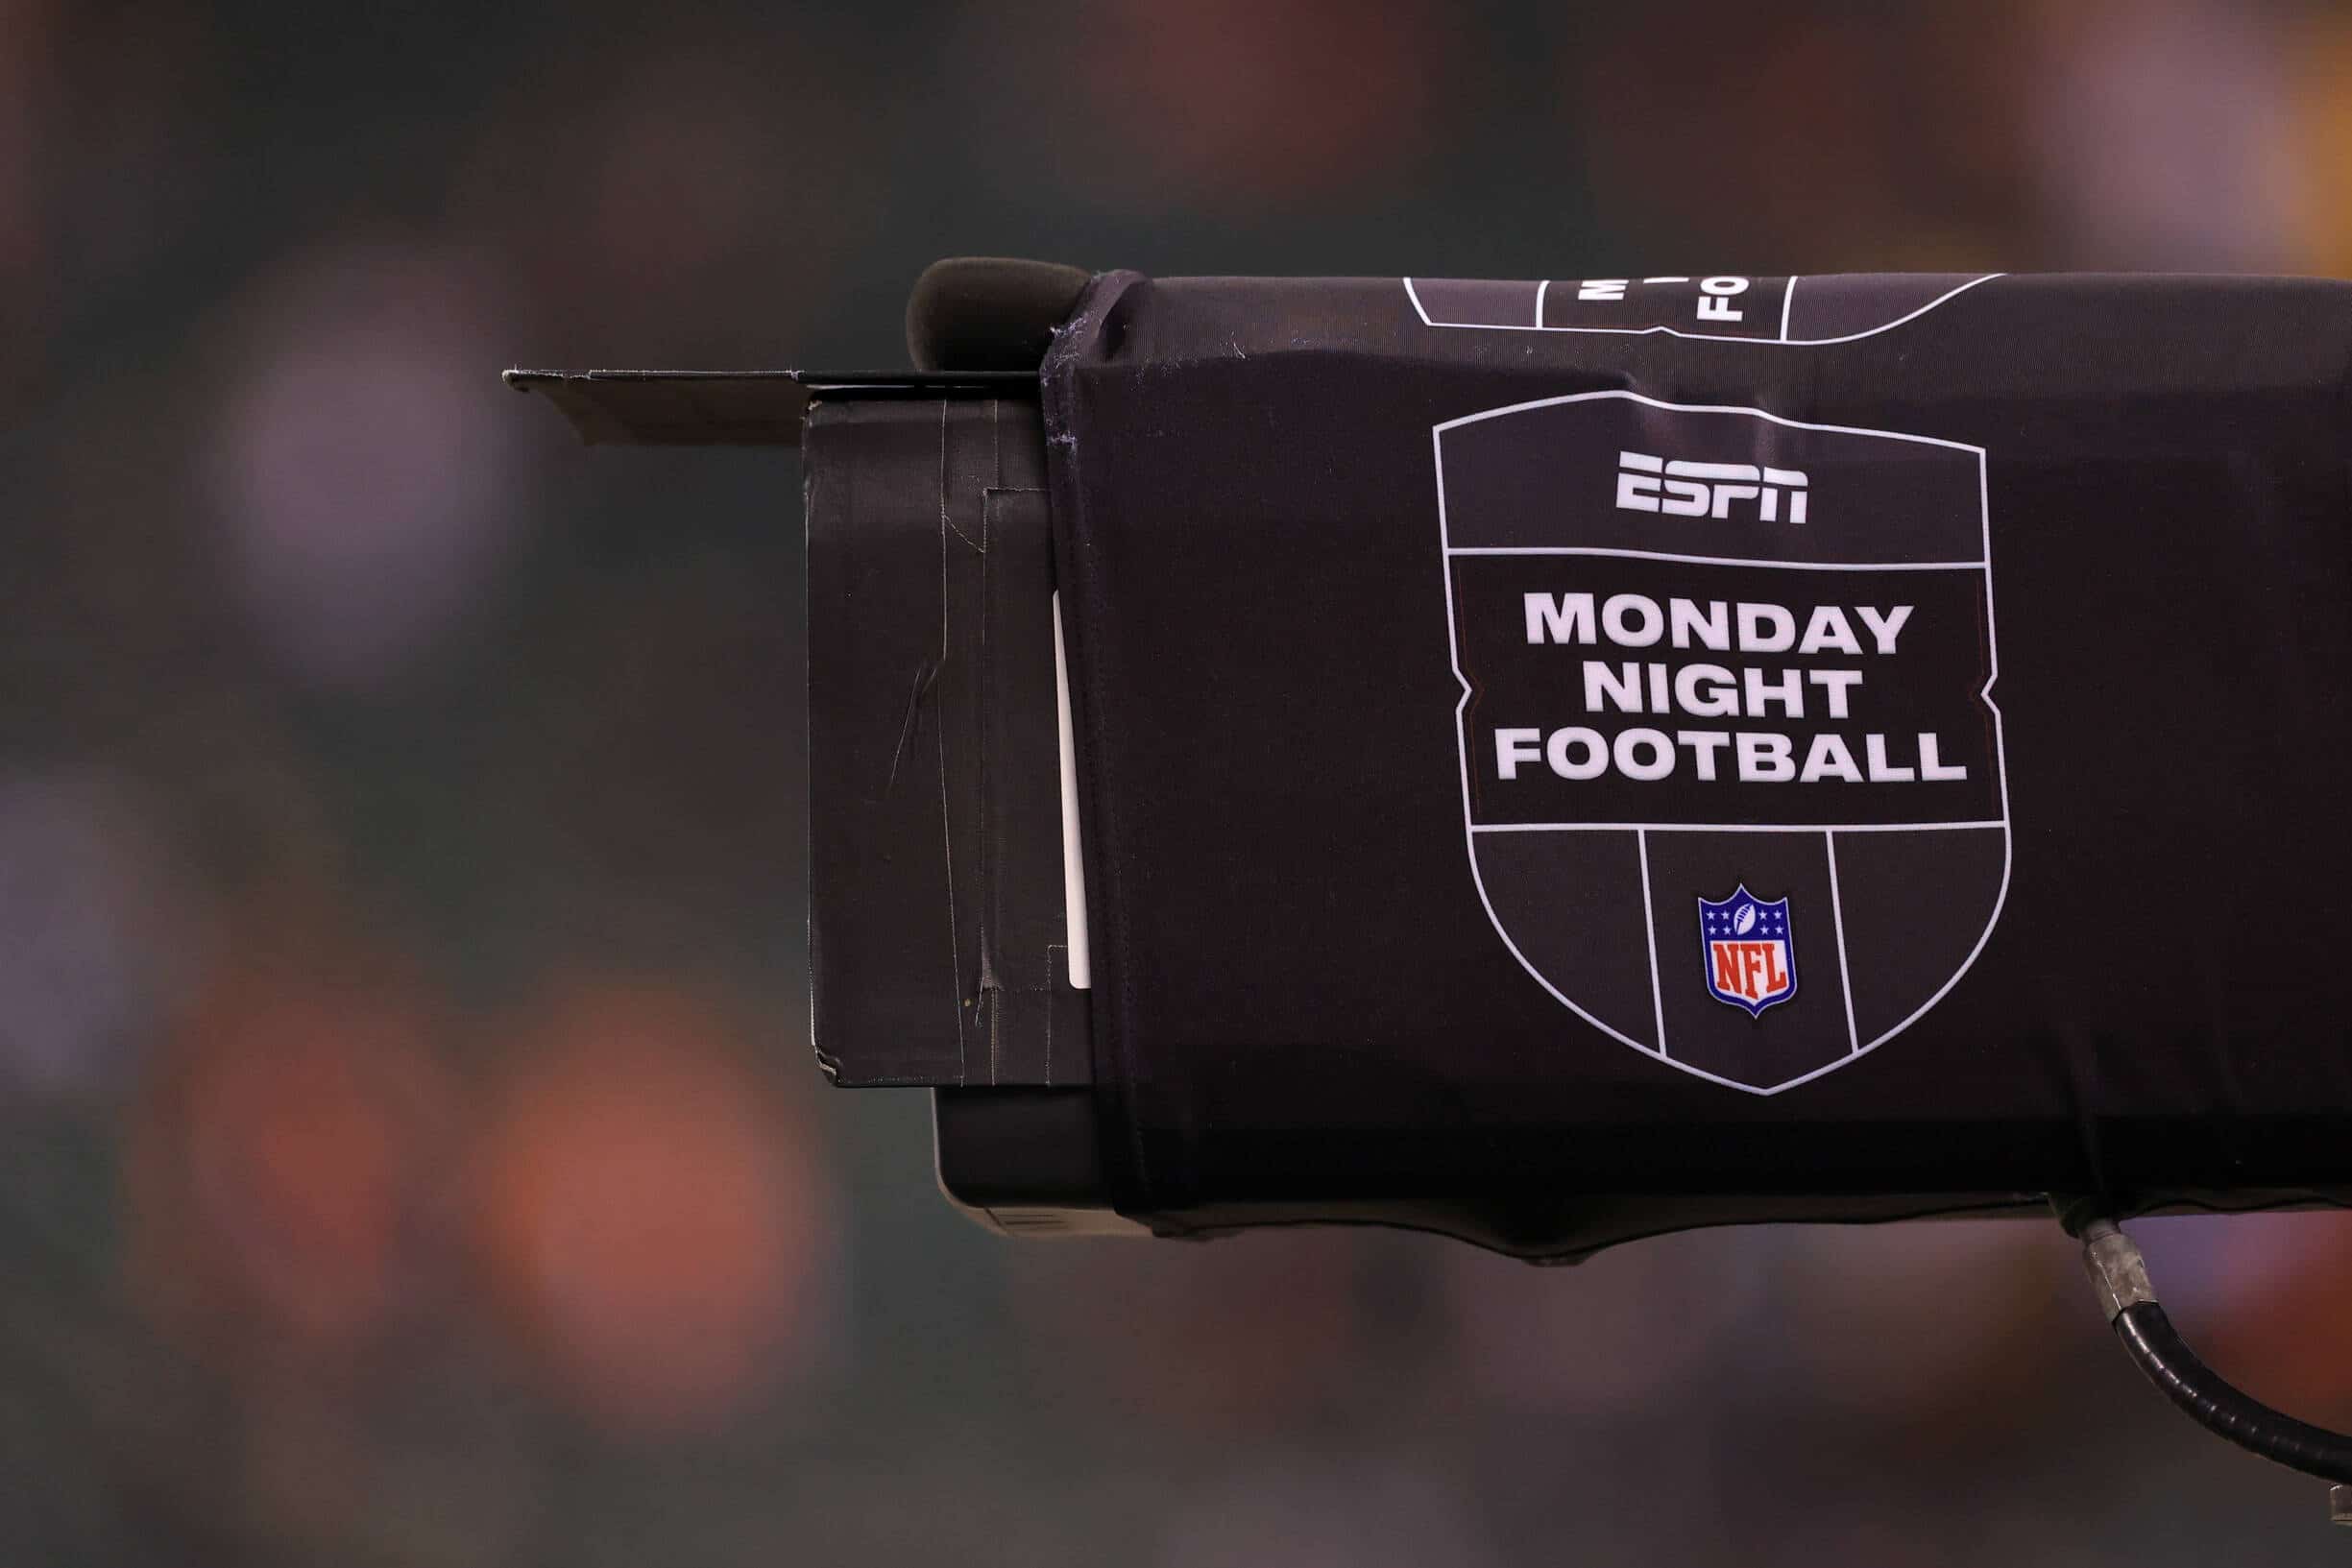 CINCINNATI, OH - DECEMBER 21: A camera with a ESPN Monday Night Football banner during the game against the Pittsburgh S